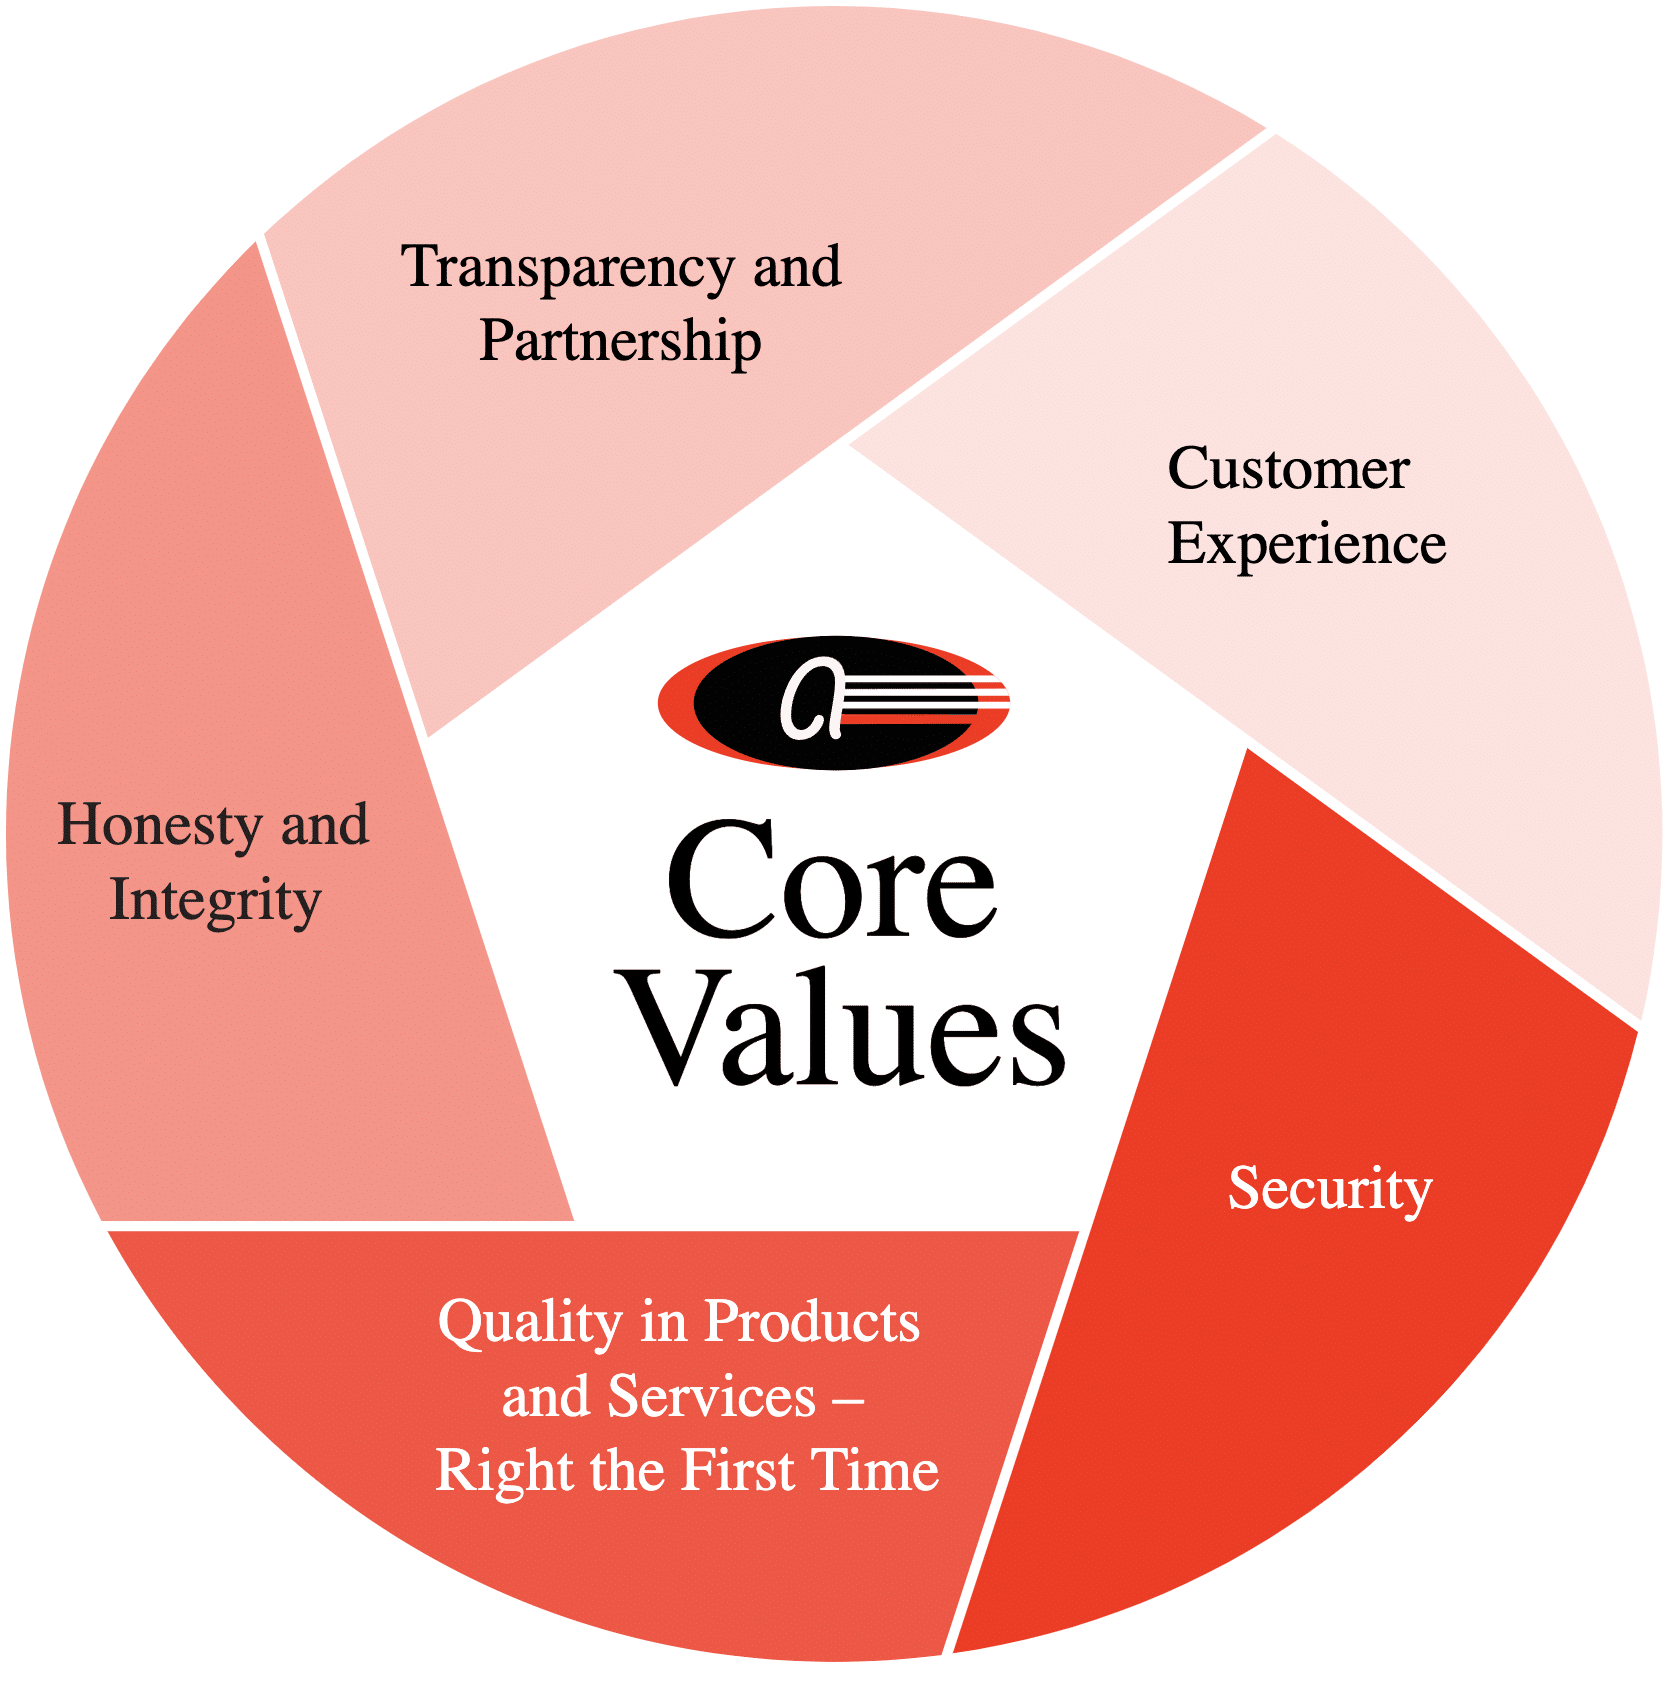 Our core values chart